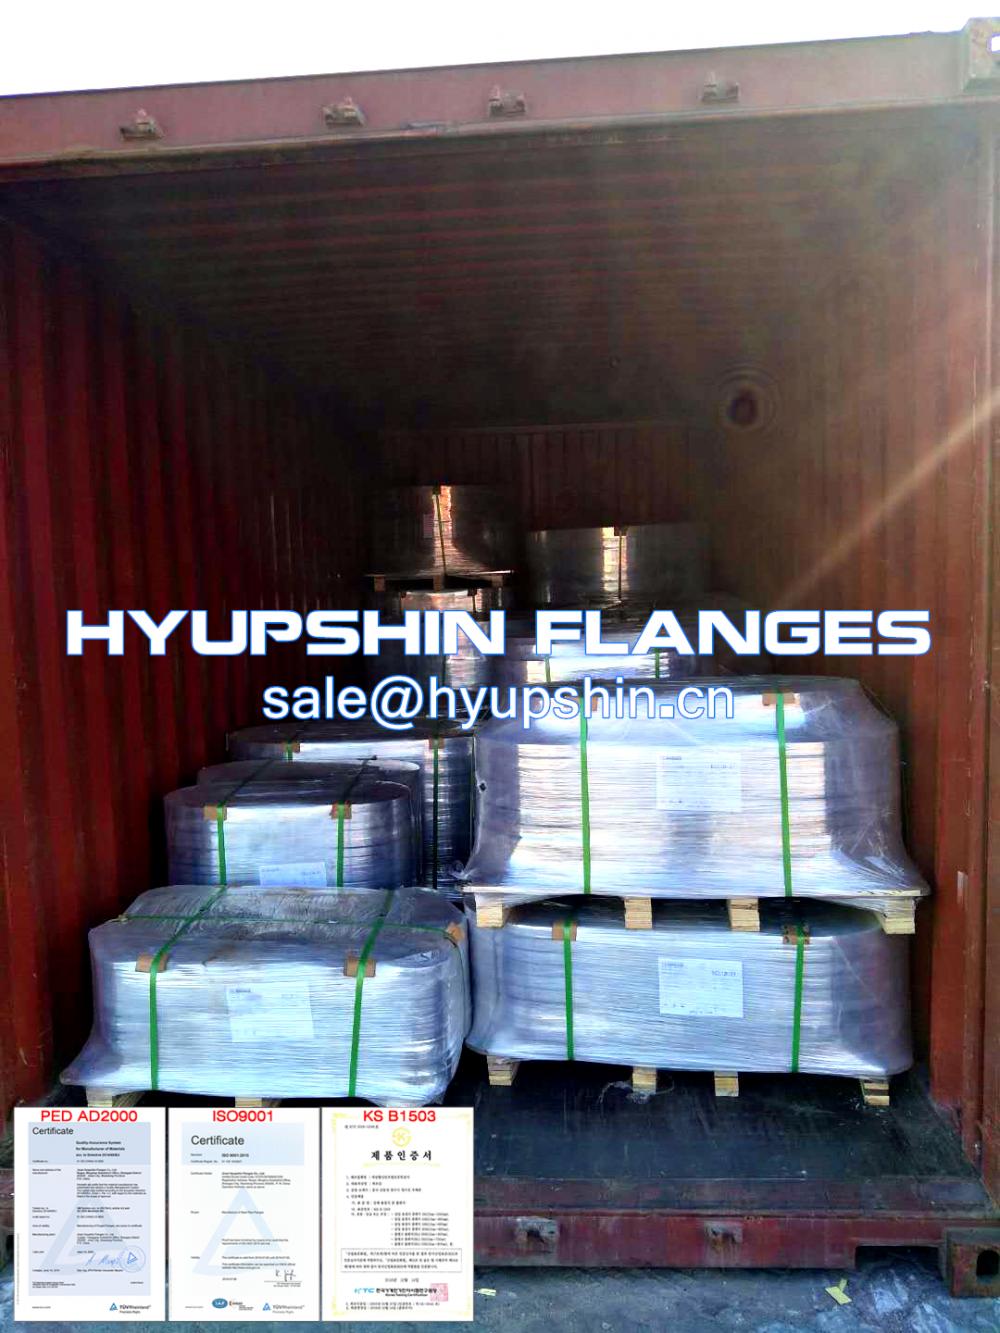 Hyupshin Flanges Export Shipment Package